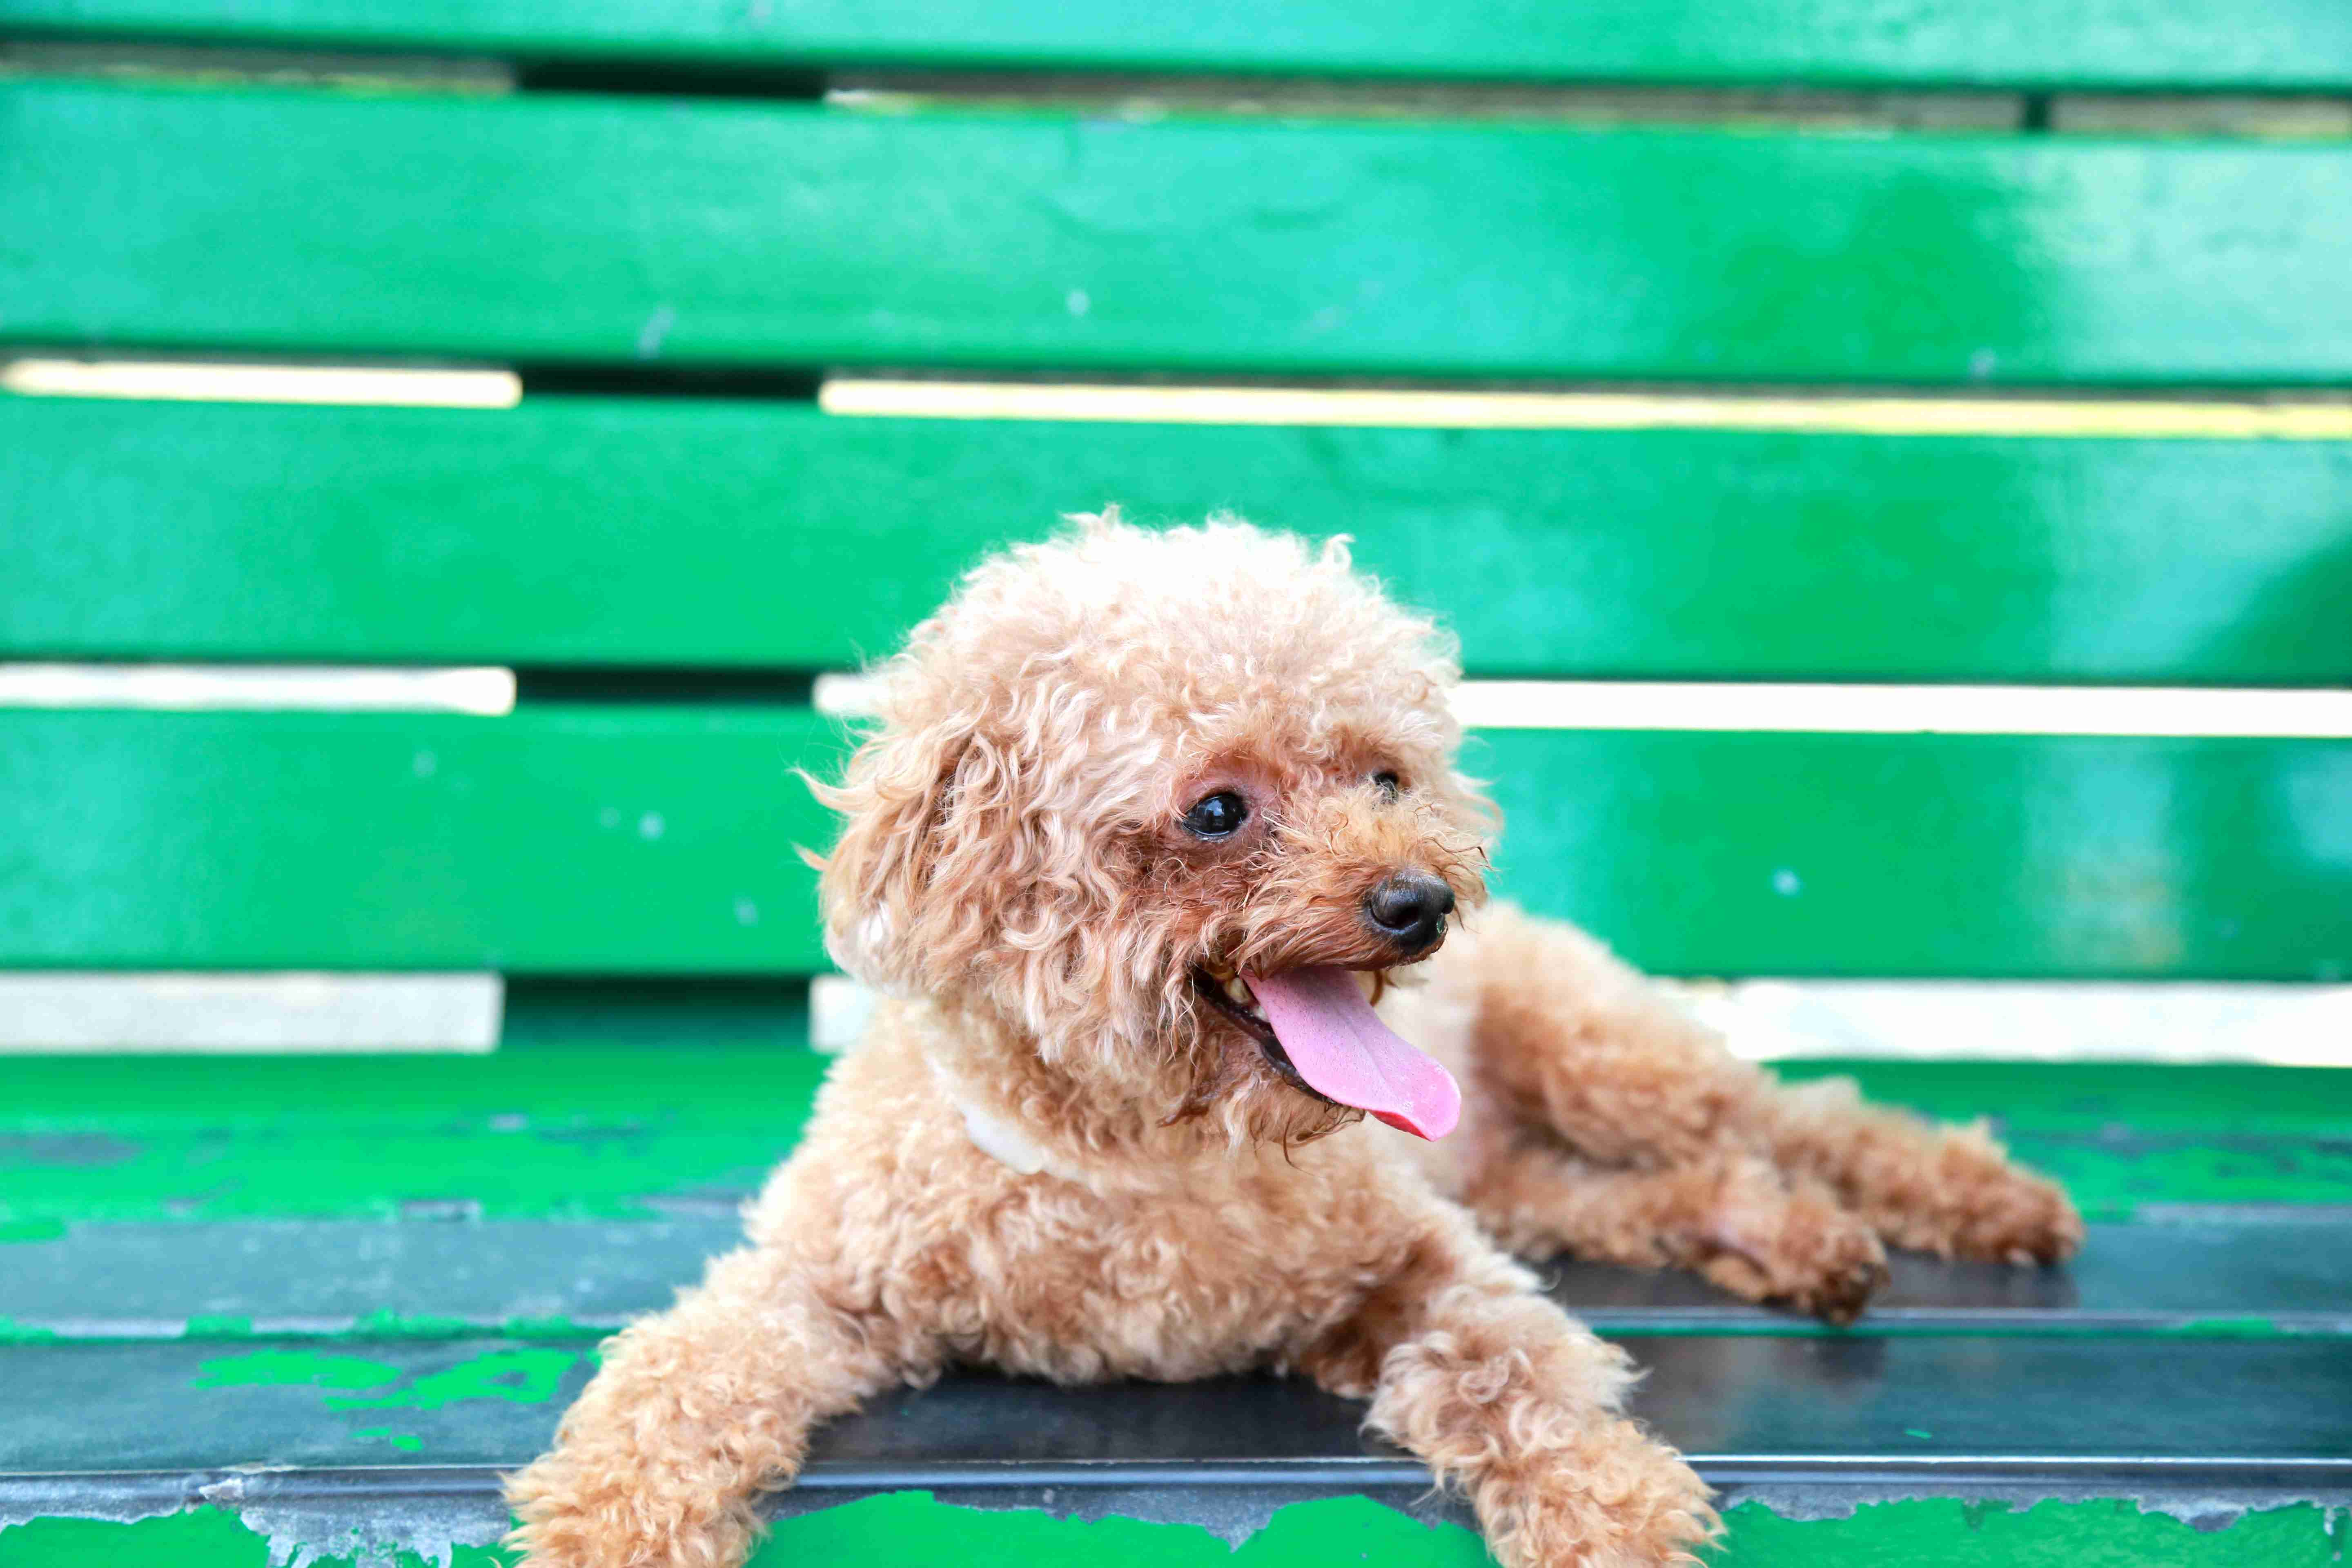 How did you handle any instances of jumping or excessive excitement in your Poodle puppy?